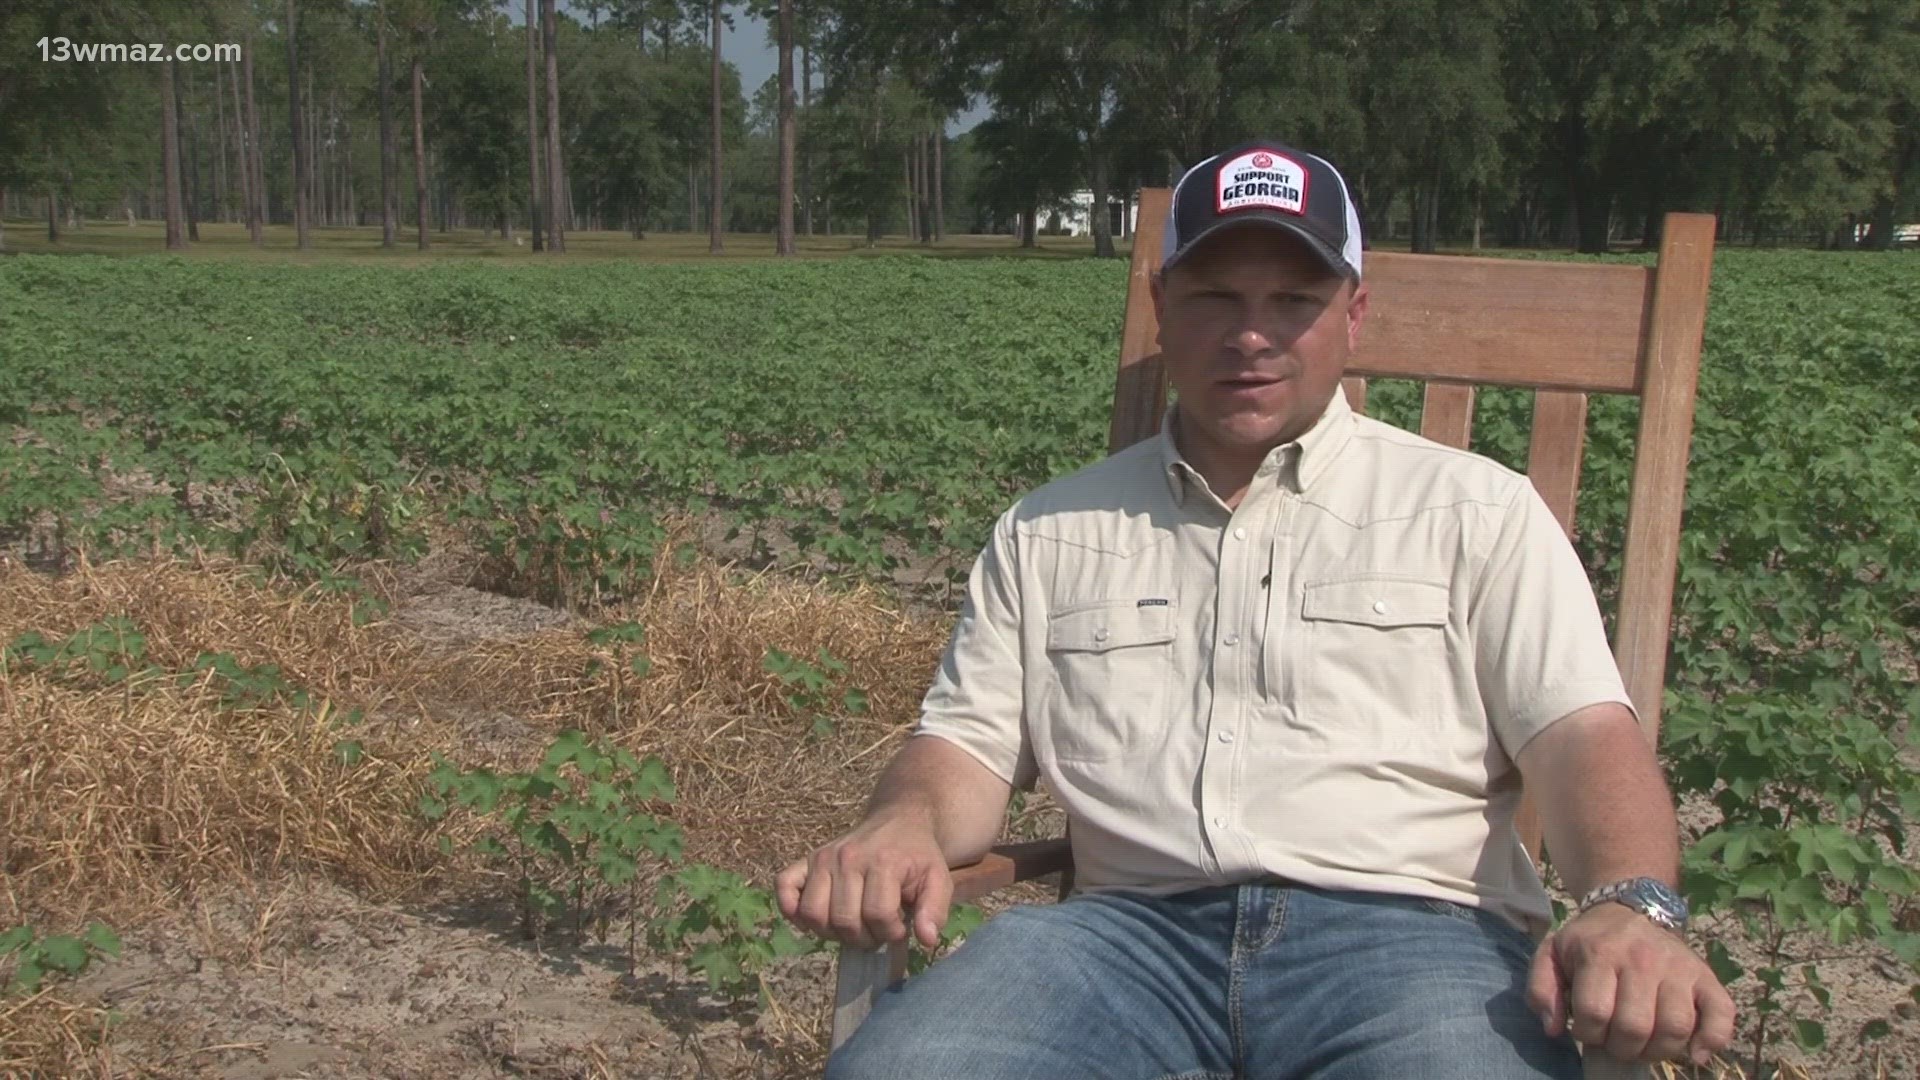 Tyler Harper has about 7 months under his belt as Georgia's new agriculture Commissioner.